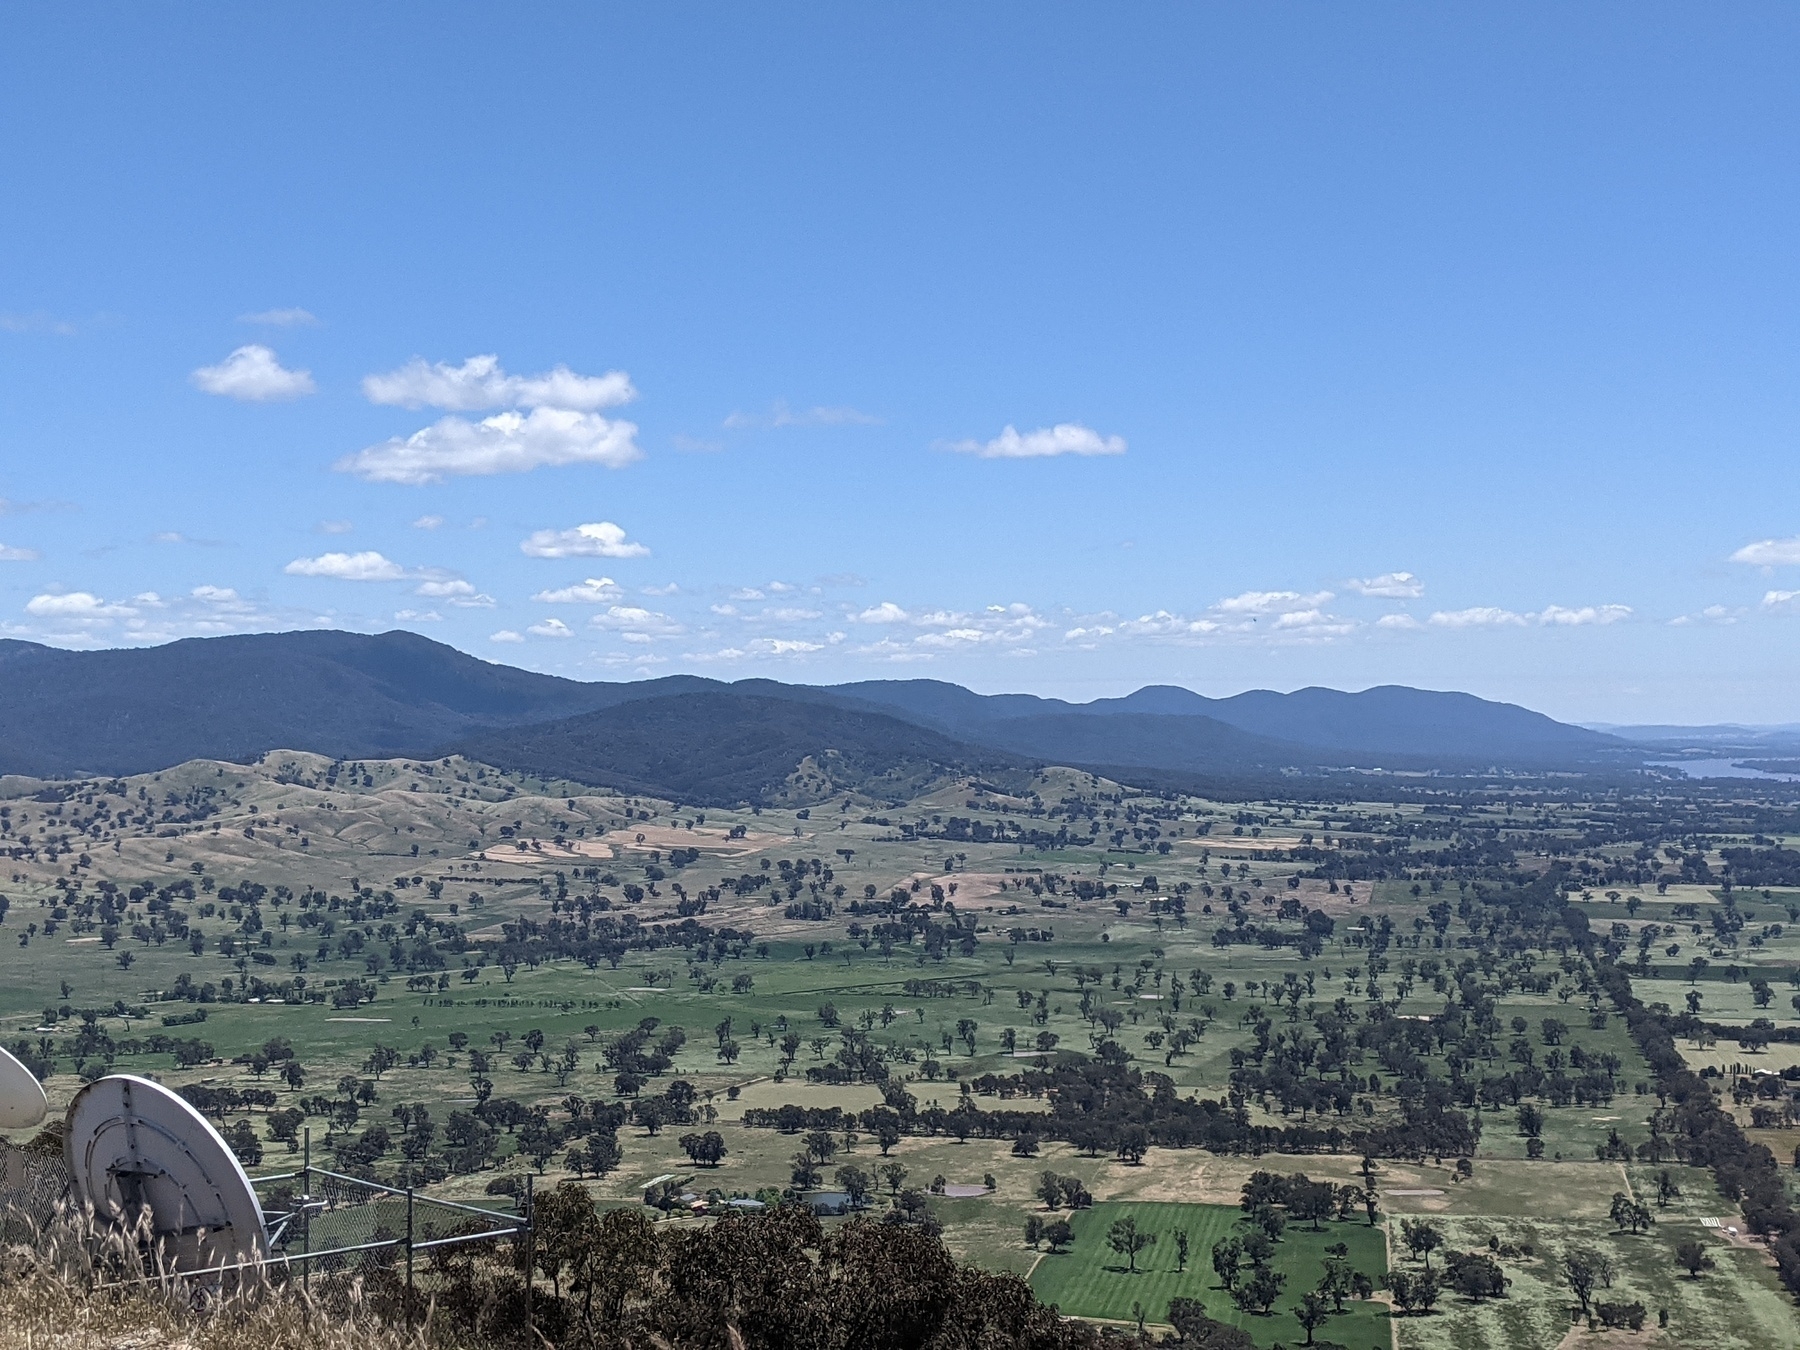 View up the highway towards Bonni Doon